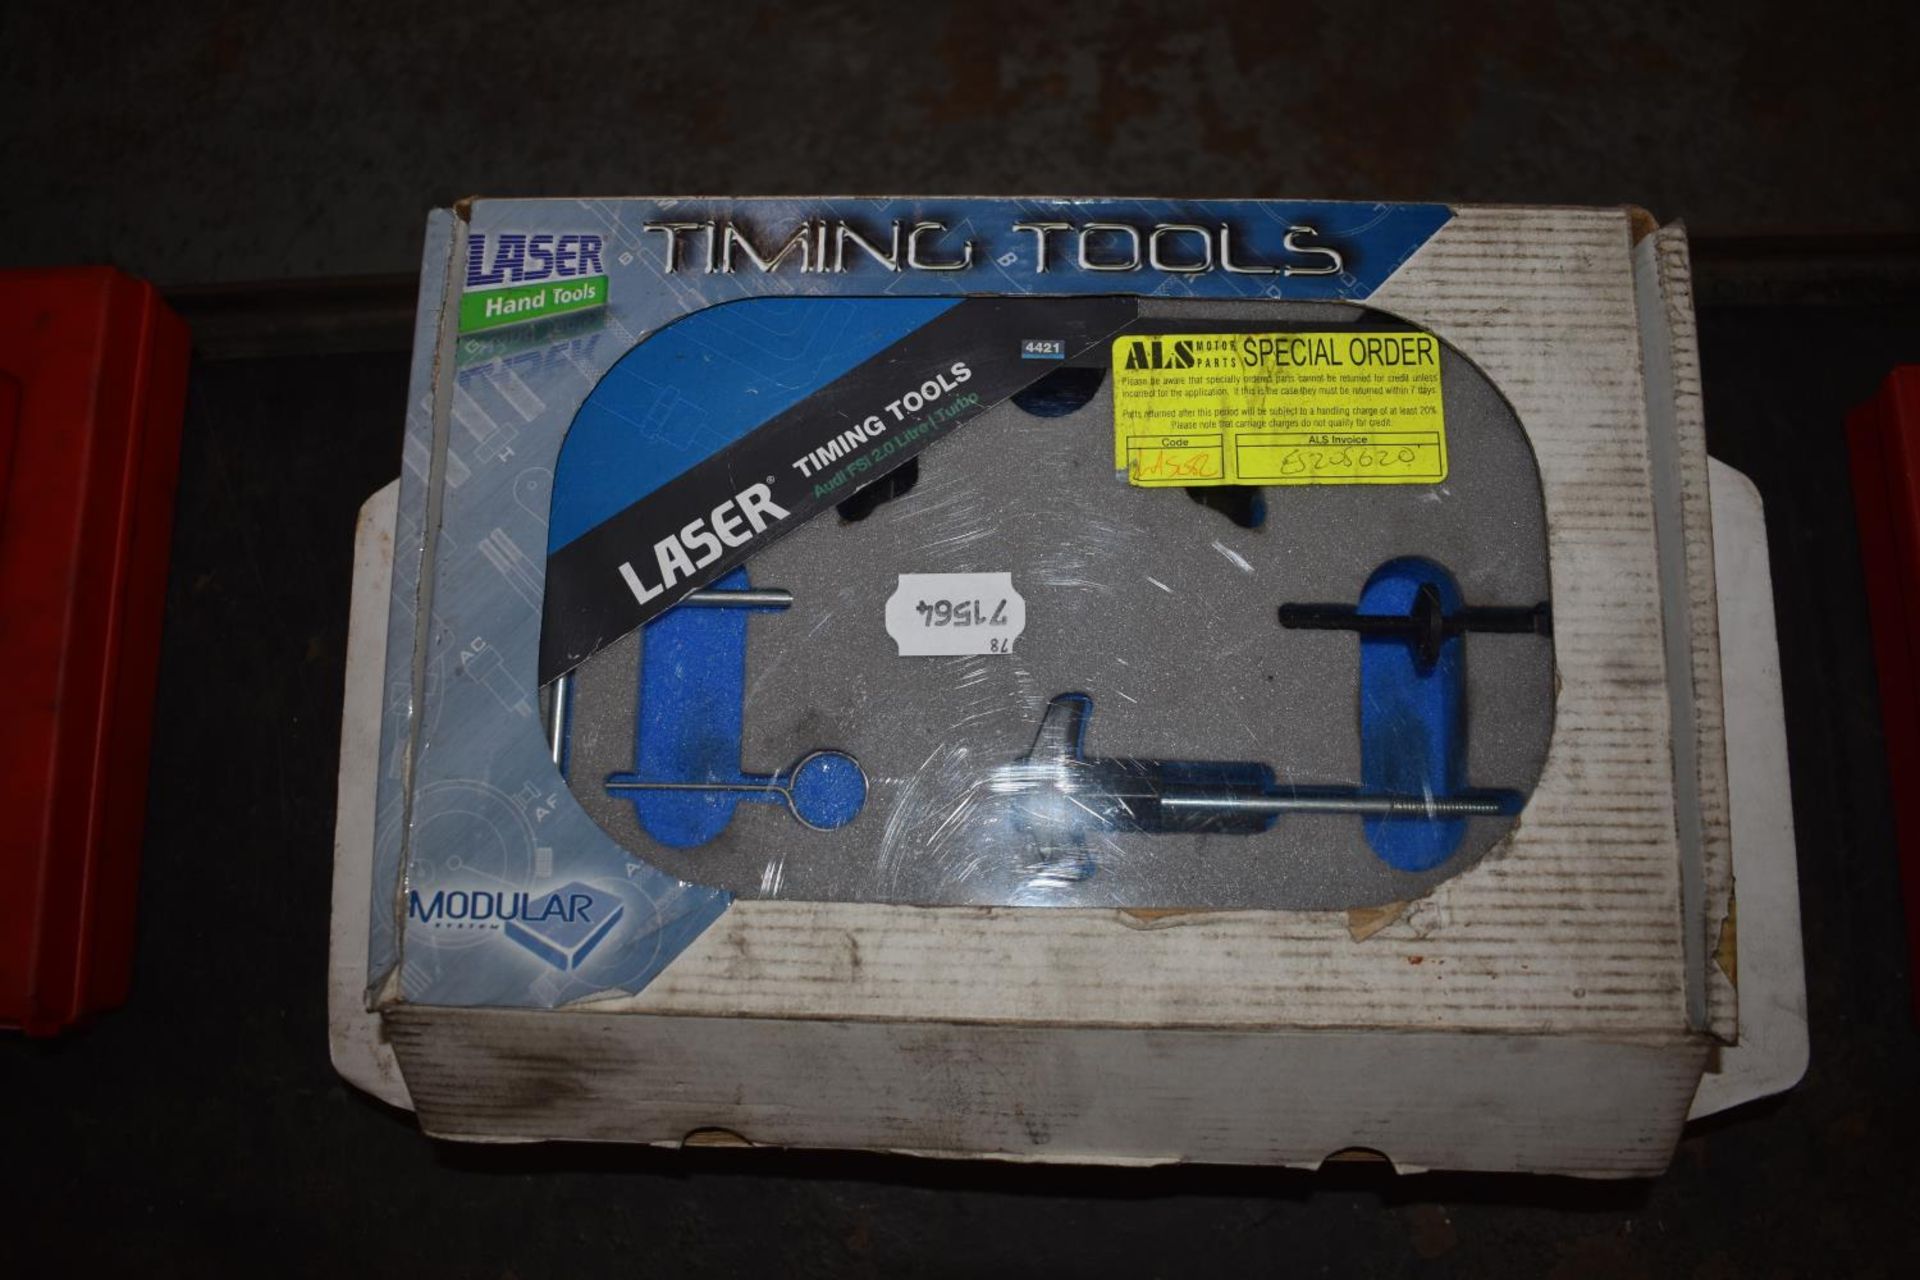 A Laser timing tools kit (Audi FSI 2 litre/turbo) and another two both boxed (2)